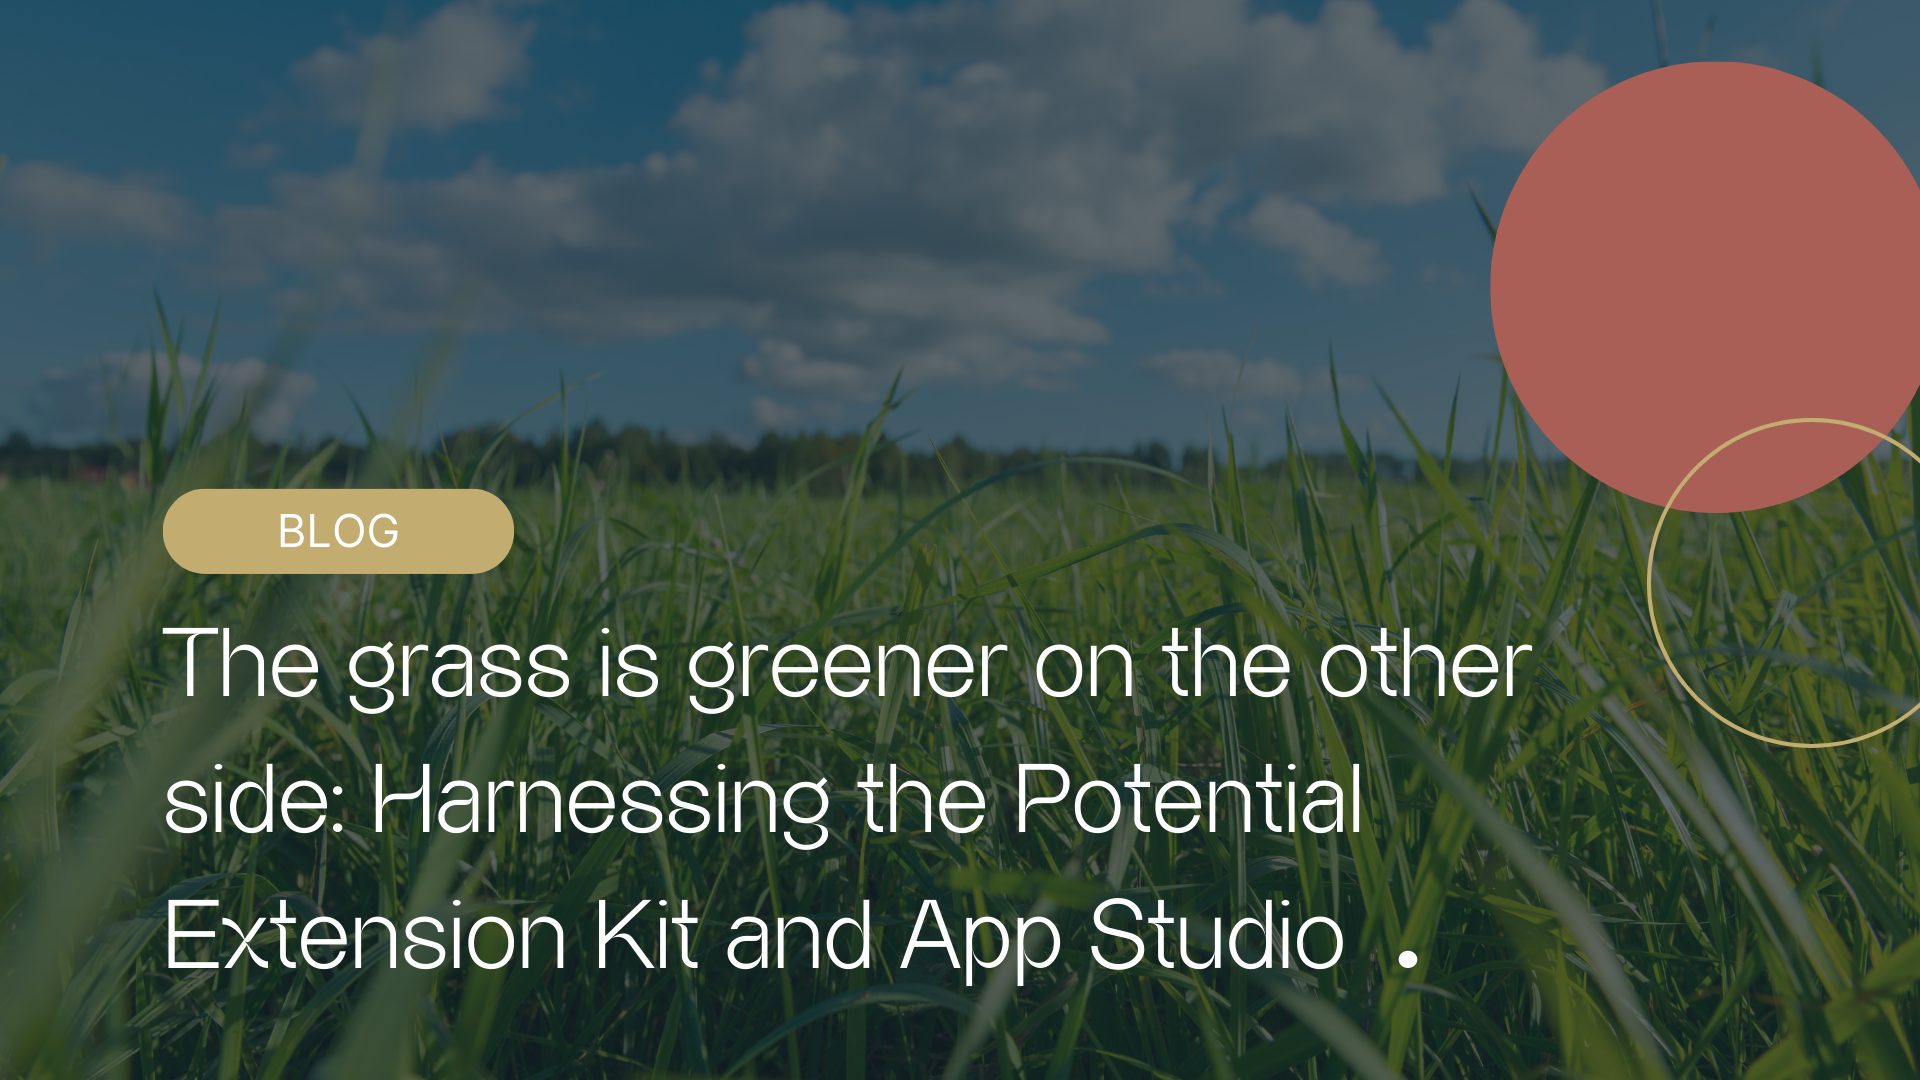 The grass is greener on the other side: Leverathe Potential Extension Kit and App Studio